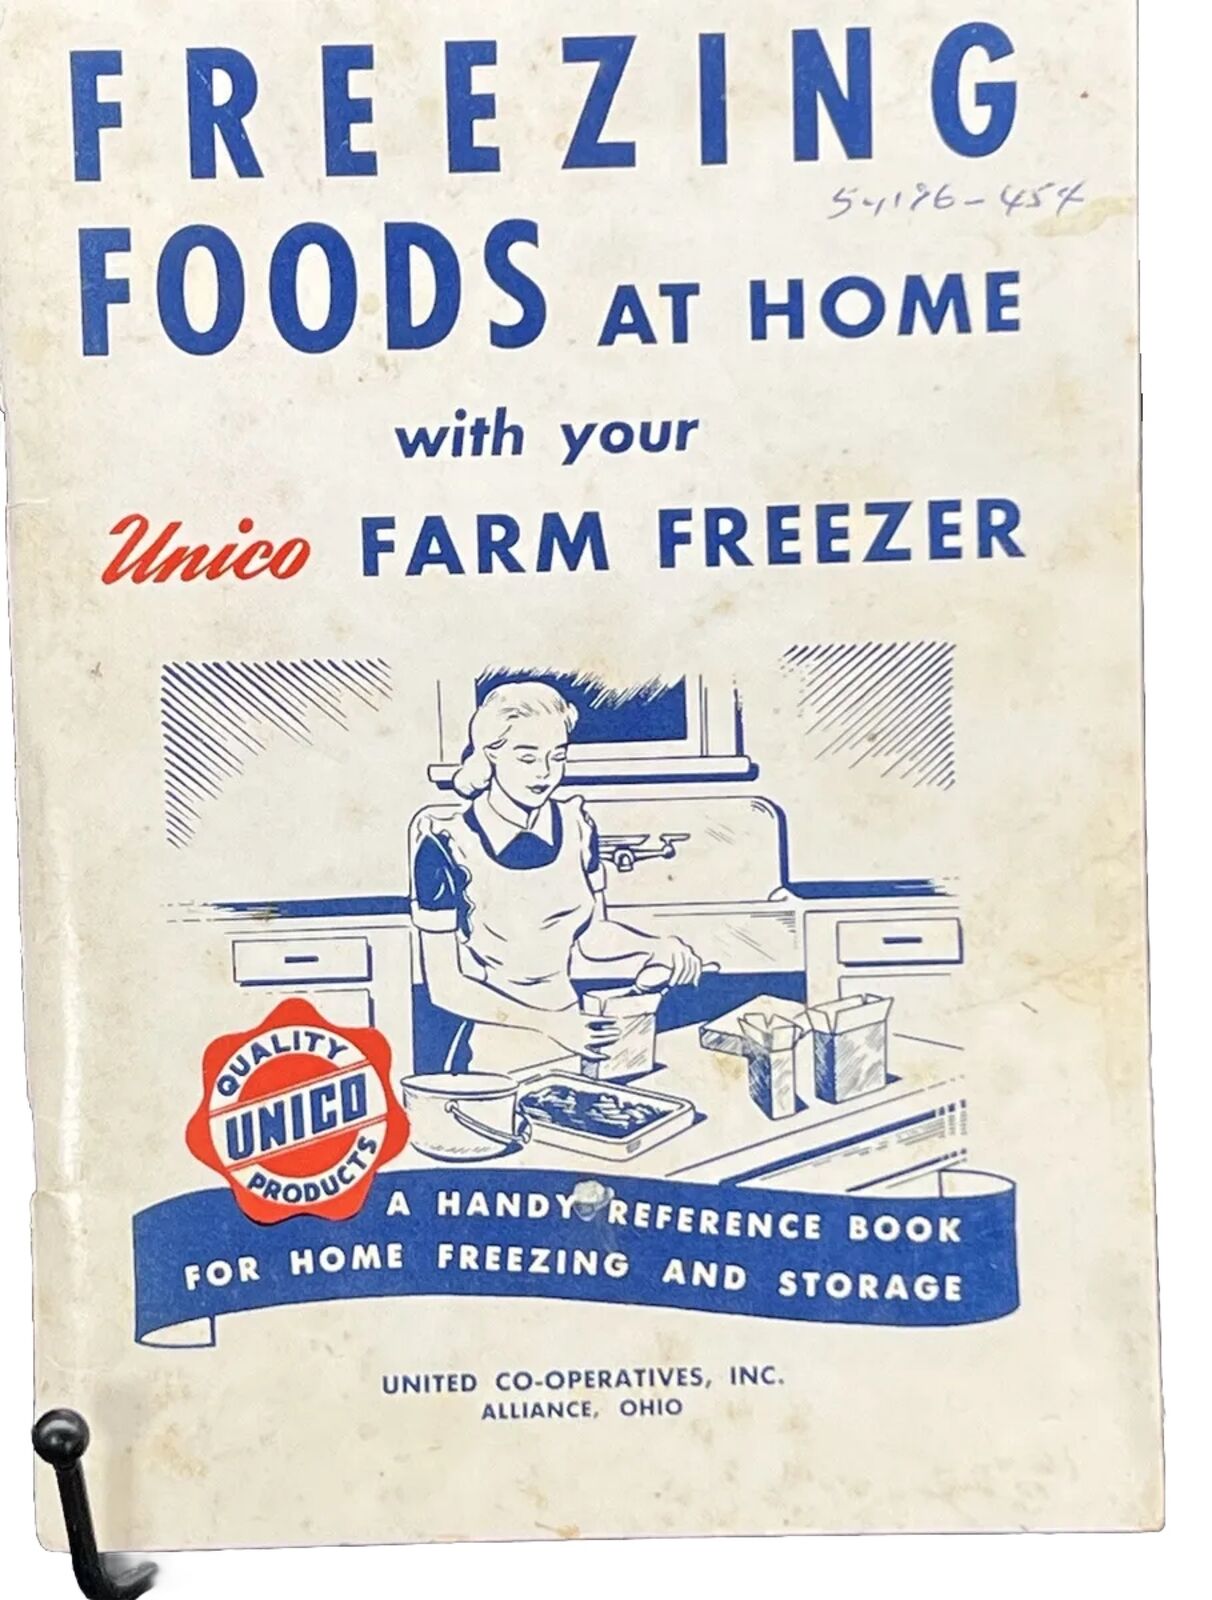 Freezing Foods At Home With Unico Farm Freezer Booklet 1949 Edition Vintage